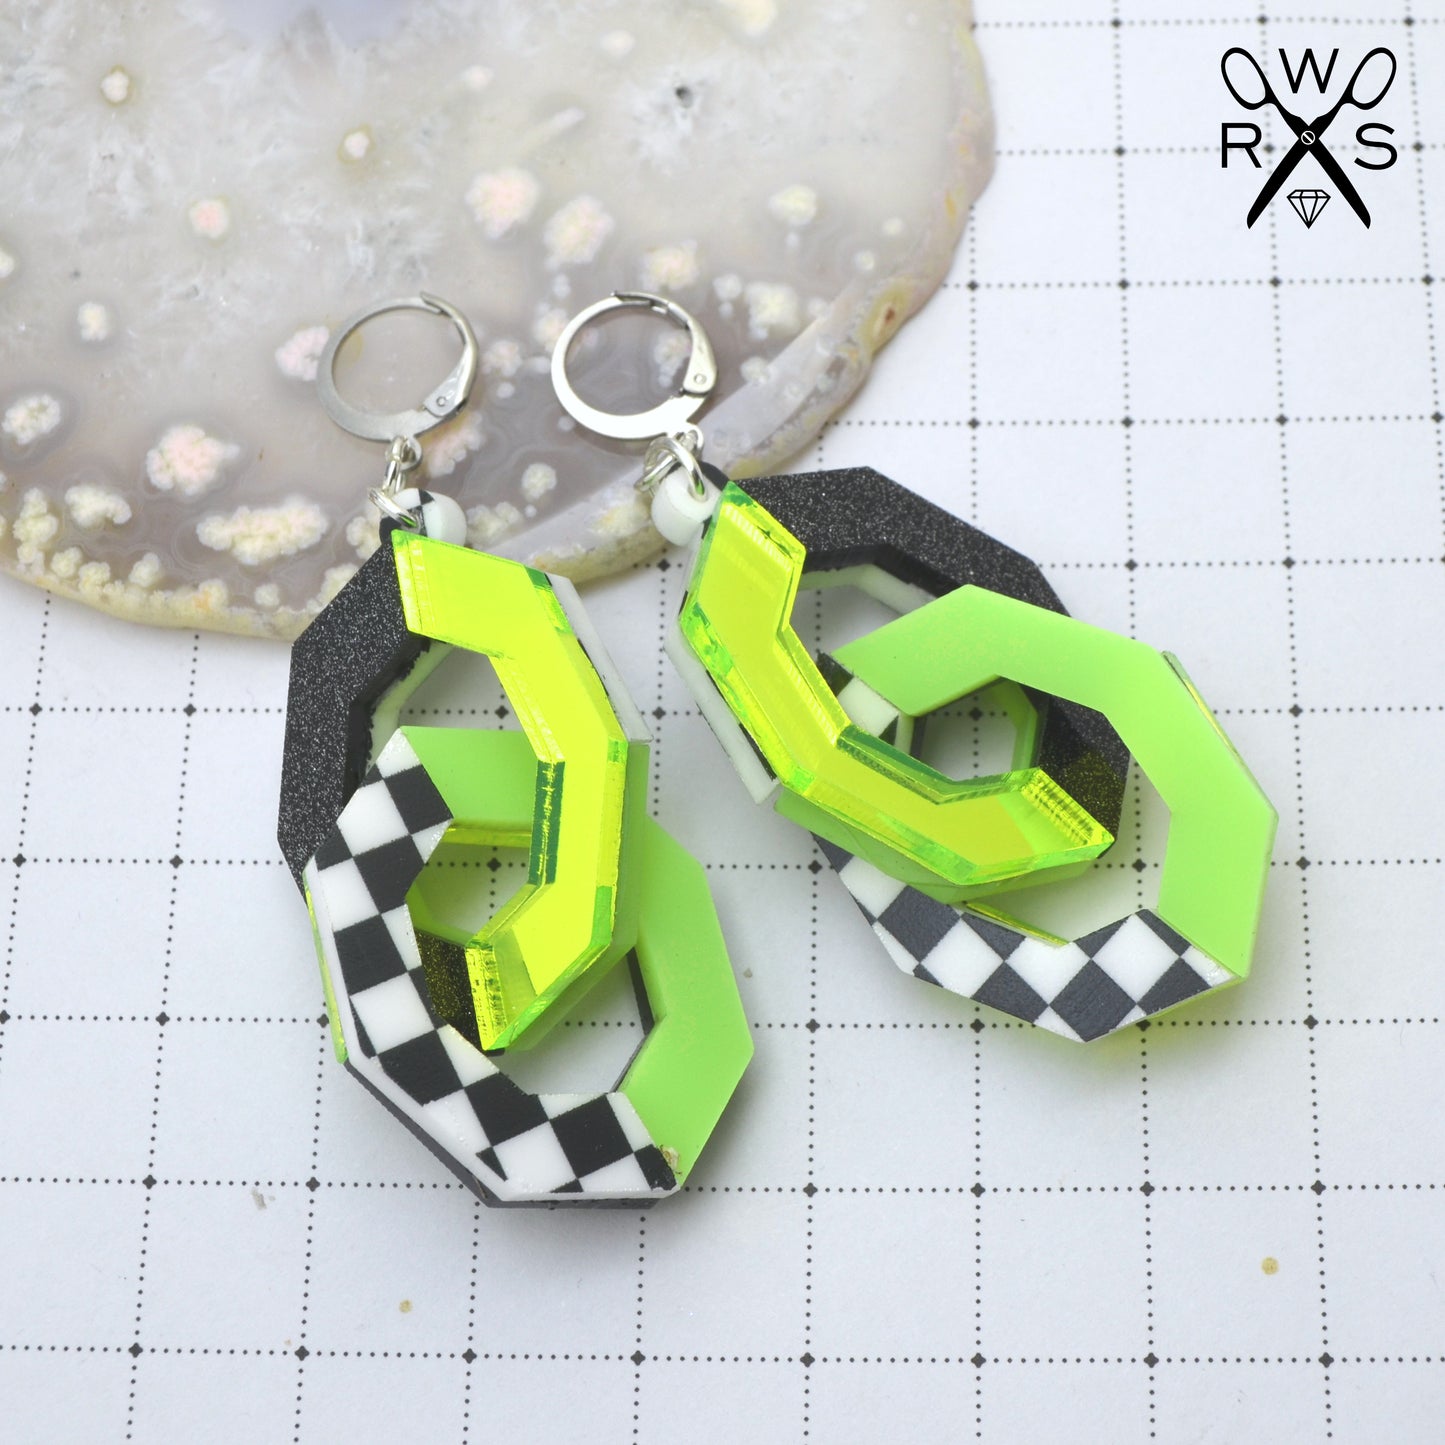 LINKED UP Laser Cut Acrylic Chain Link Dangle Earrings in Lime Green and Checkered Black and White